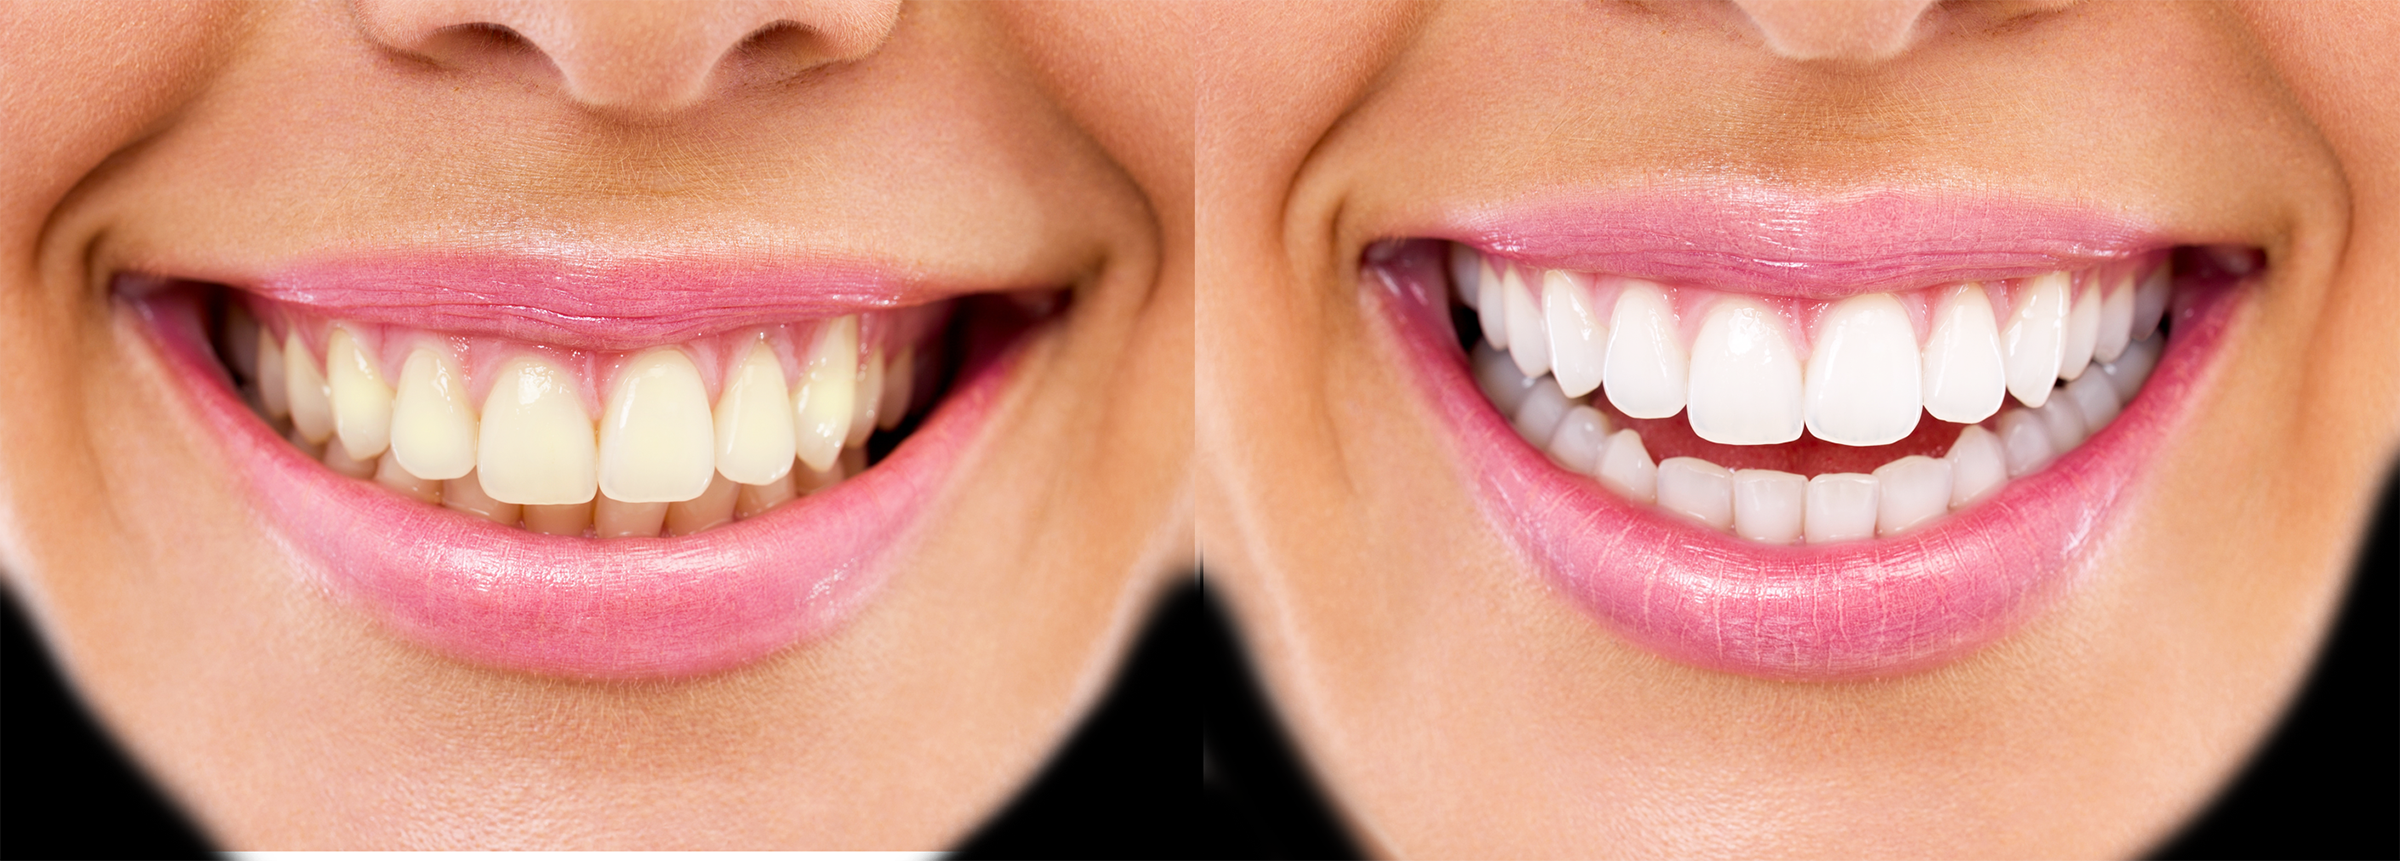 Long Island teeth whitening before and after